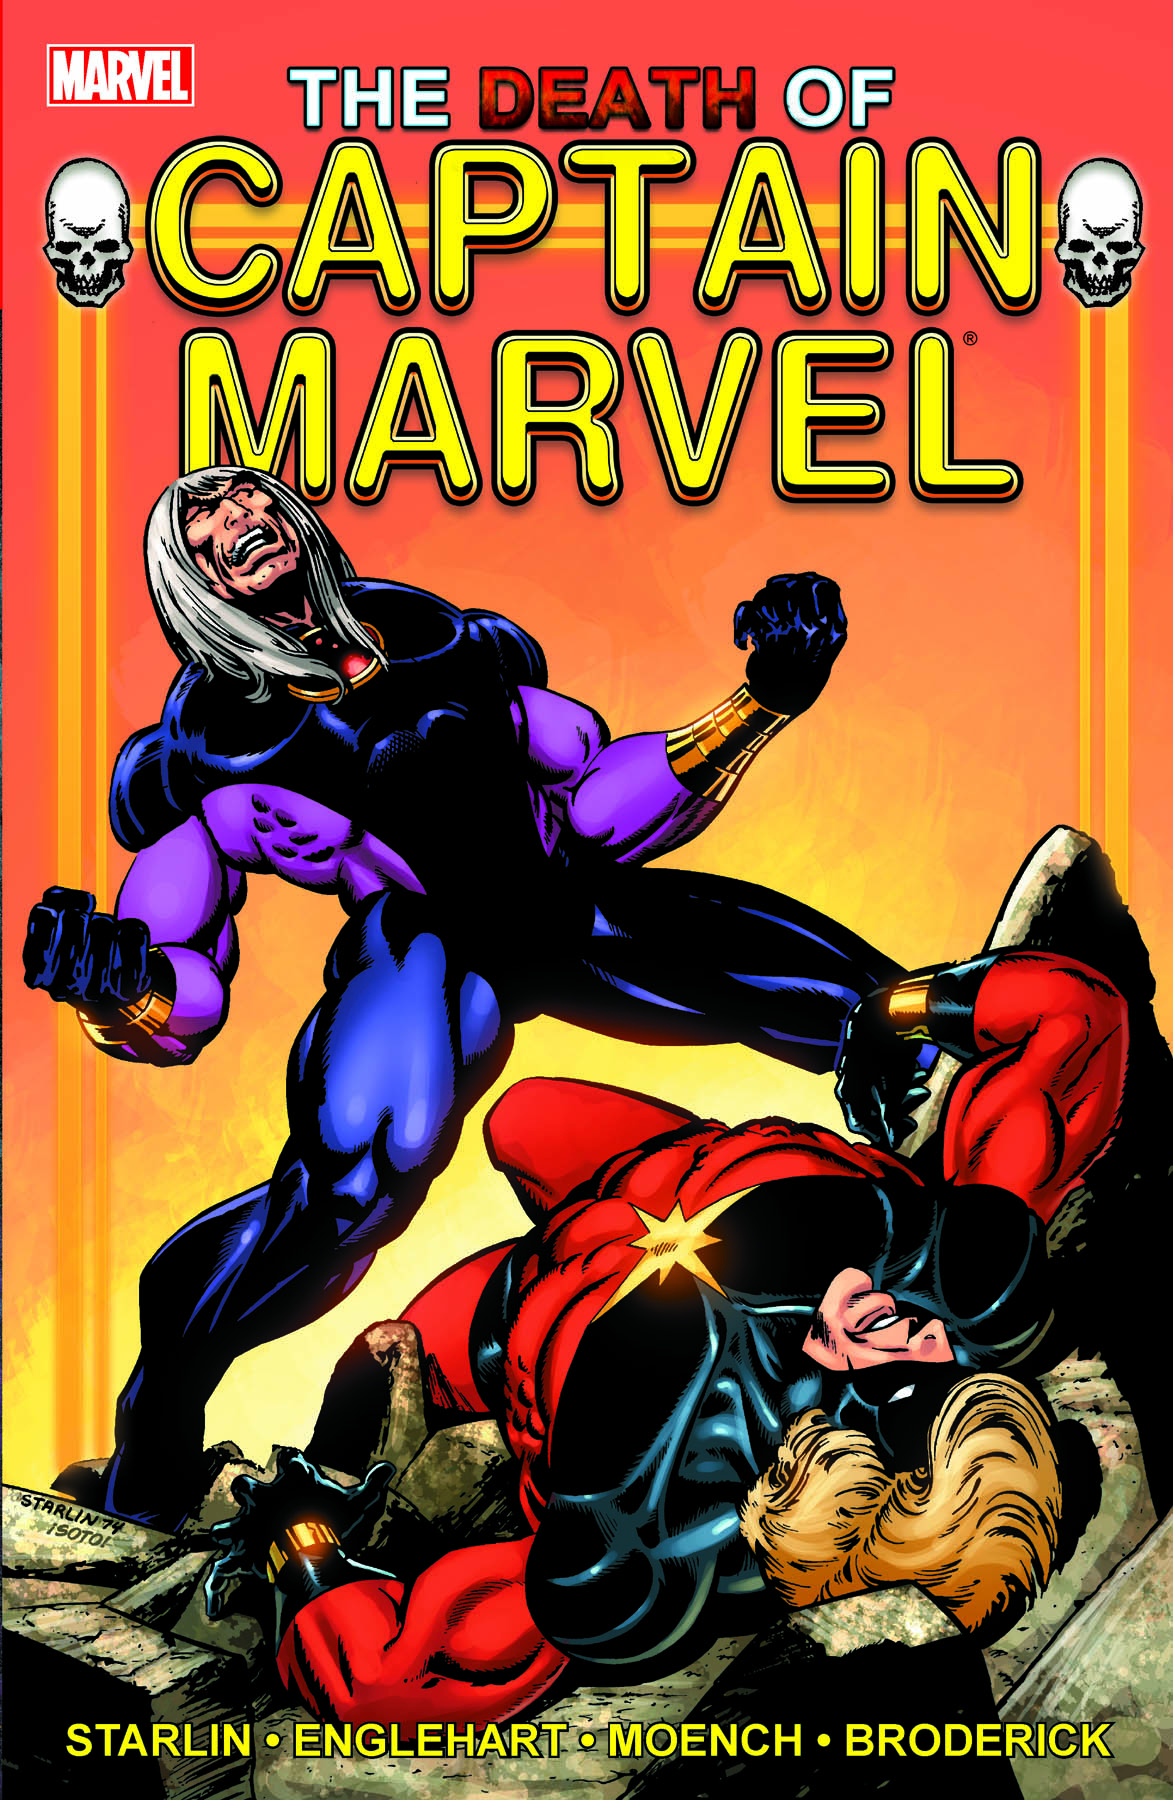 THE DEATH OF CAPTAIN MARVEL (Trade Paperback)